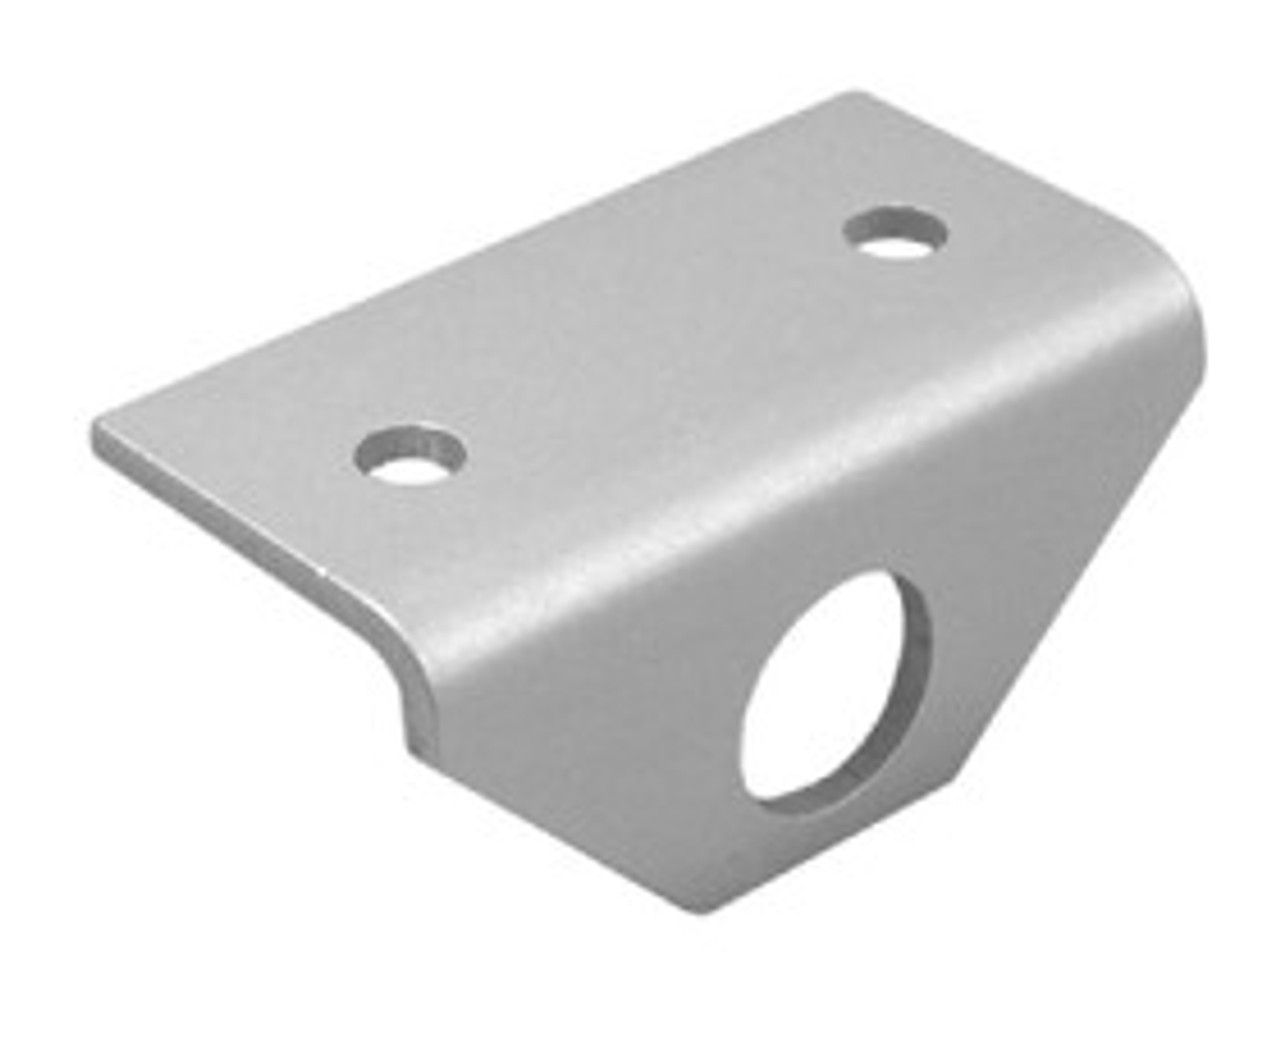 Parker Watts Sar10Y57 Panel Mounting Bracket And Nut That Uses The Bonnet Threads Of The Regulator Includes Plastic Panel Mount Nut